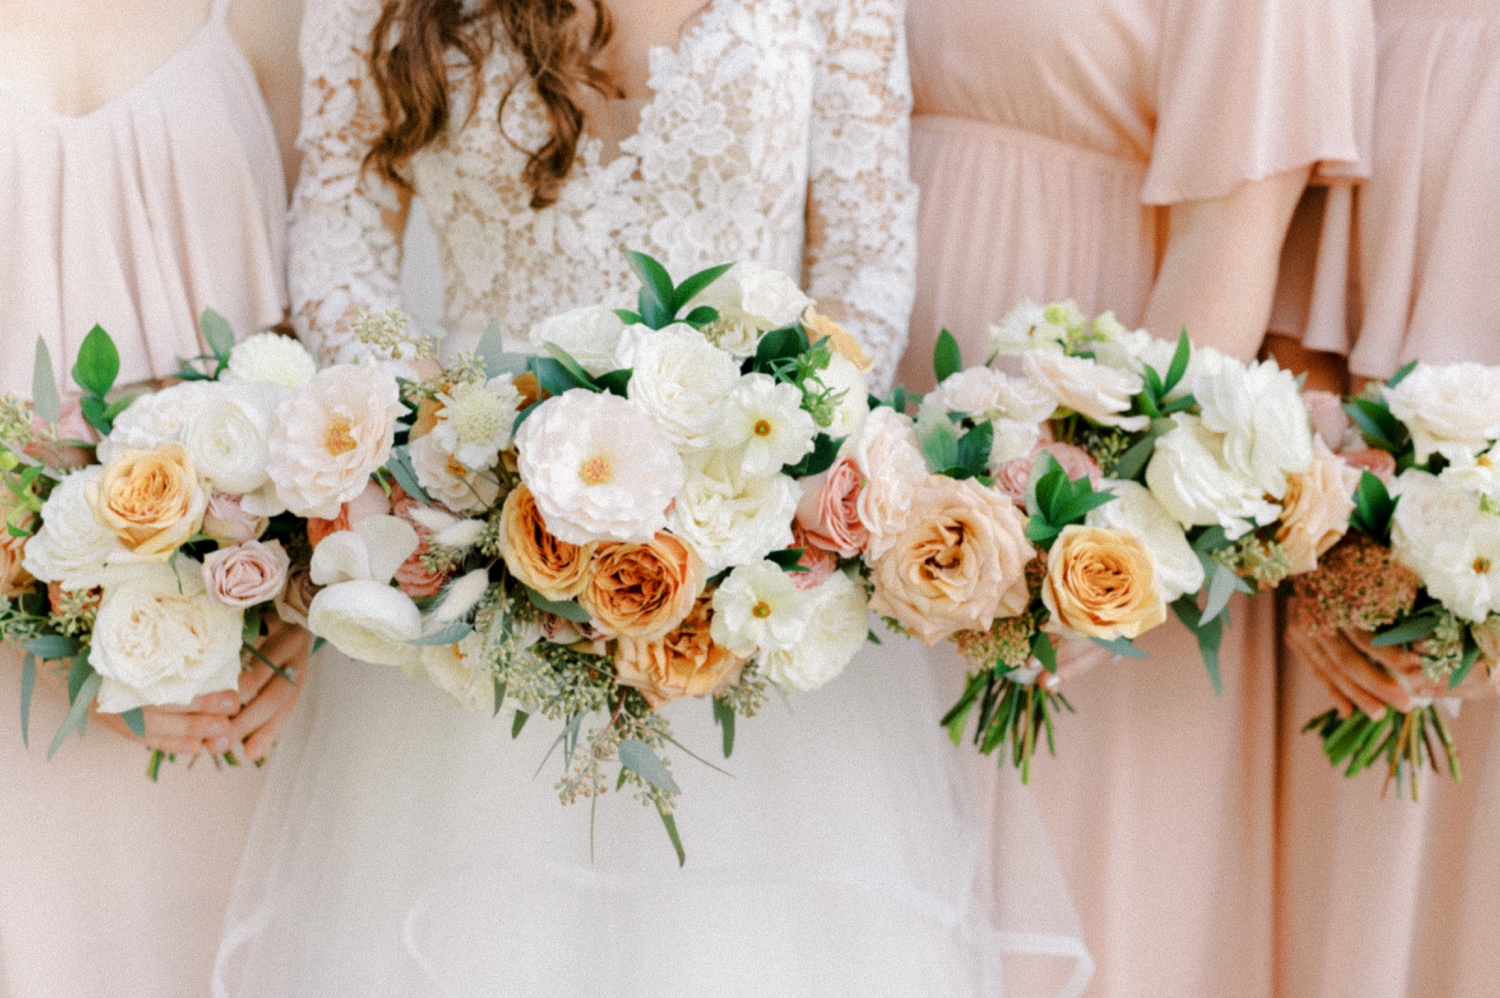 Bridesmaid florals by Kasey D Weddings for Abeja Winery Wedding